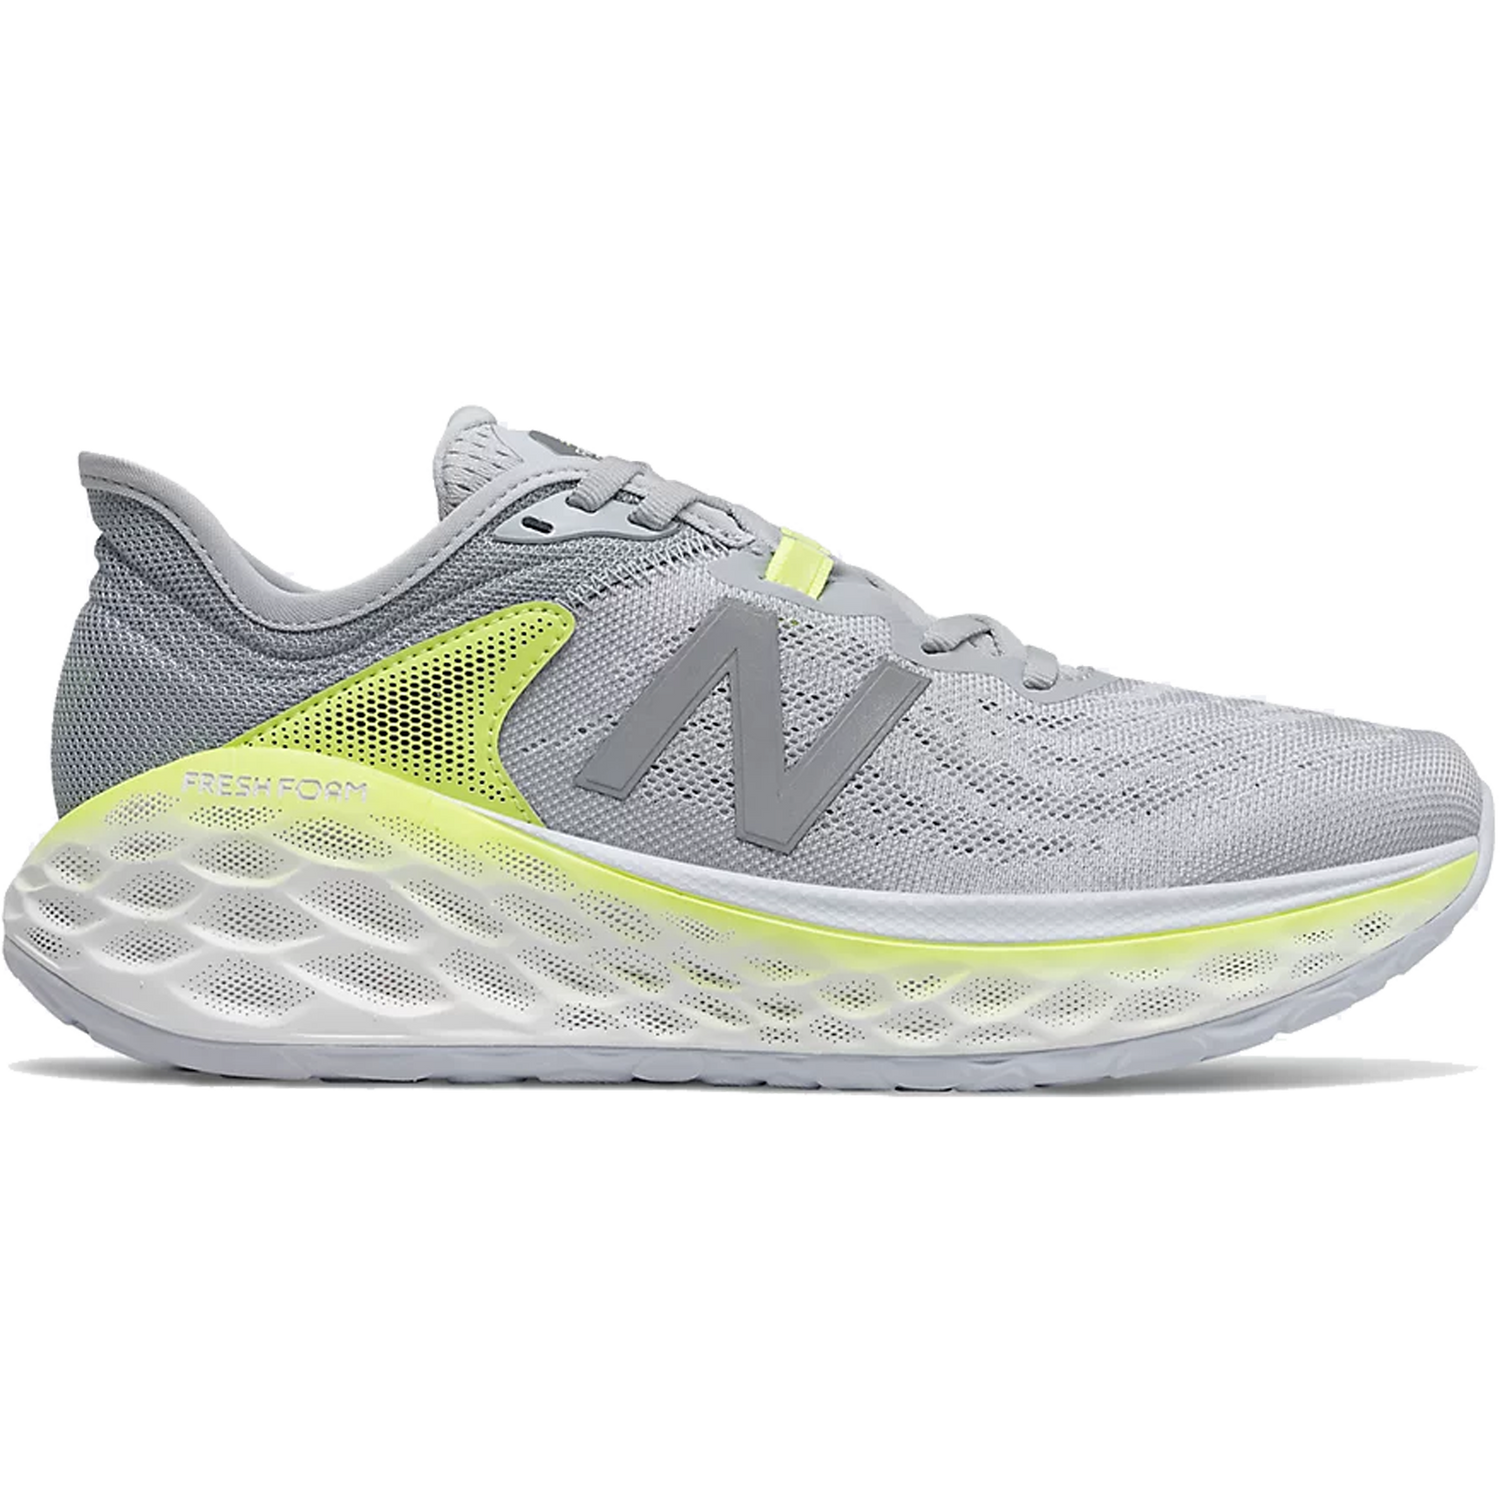 Women's New Balance More V2 running shoe. Upper in the colour grey and fresh foam sole is white with some lime colouring.  